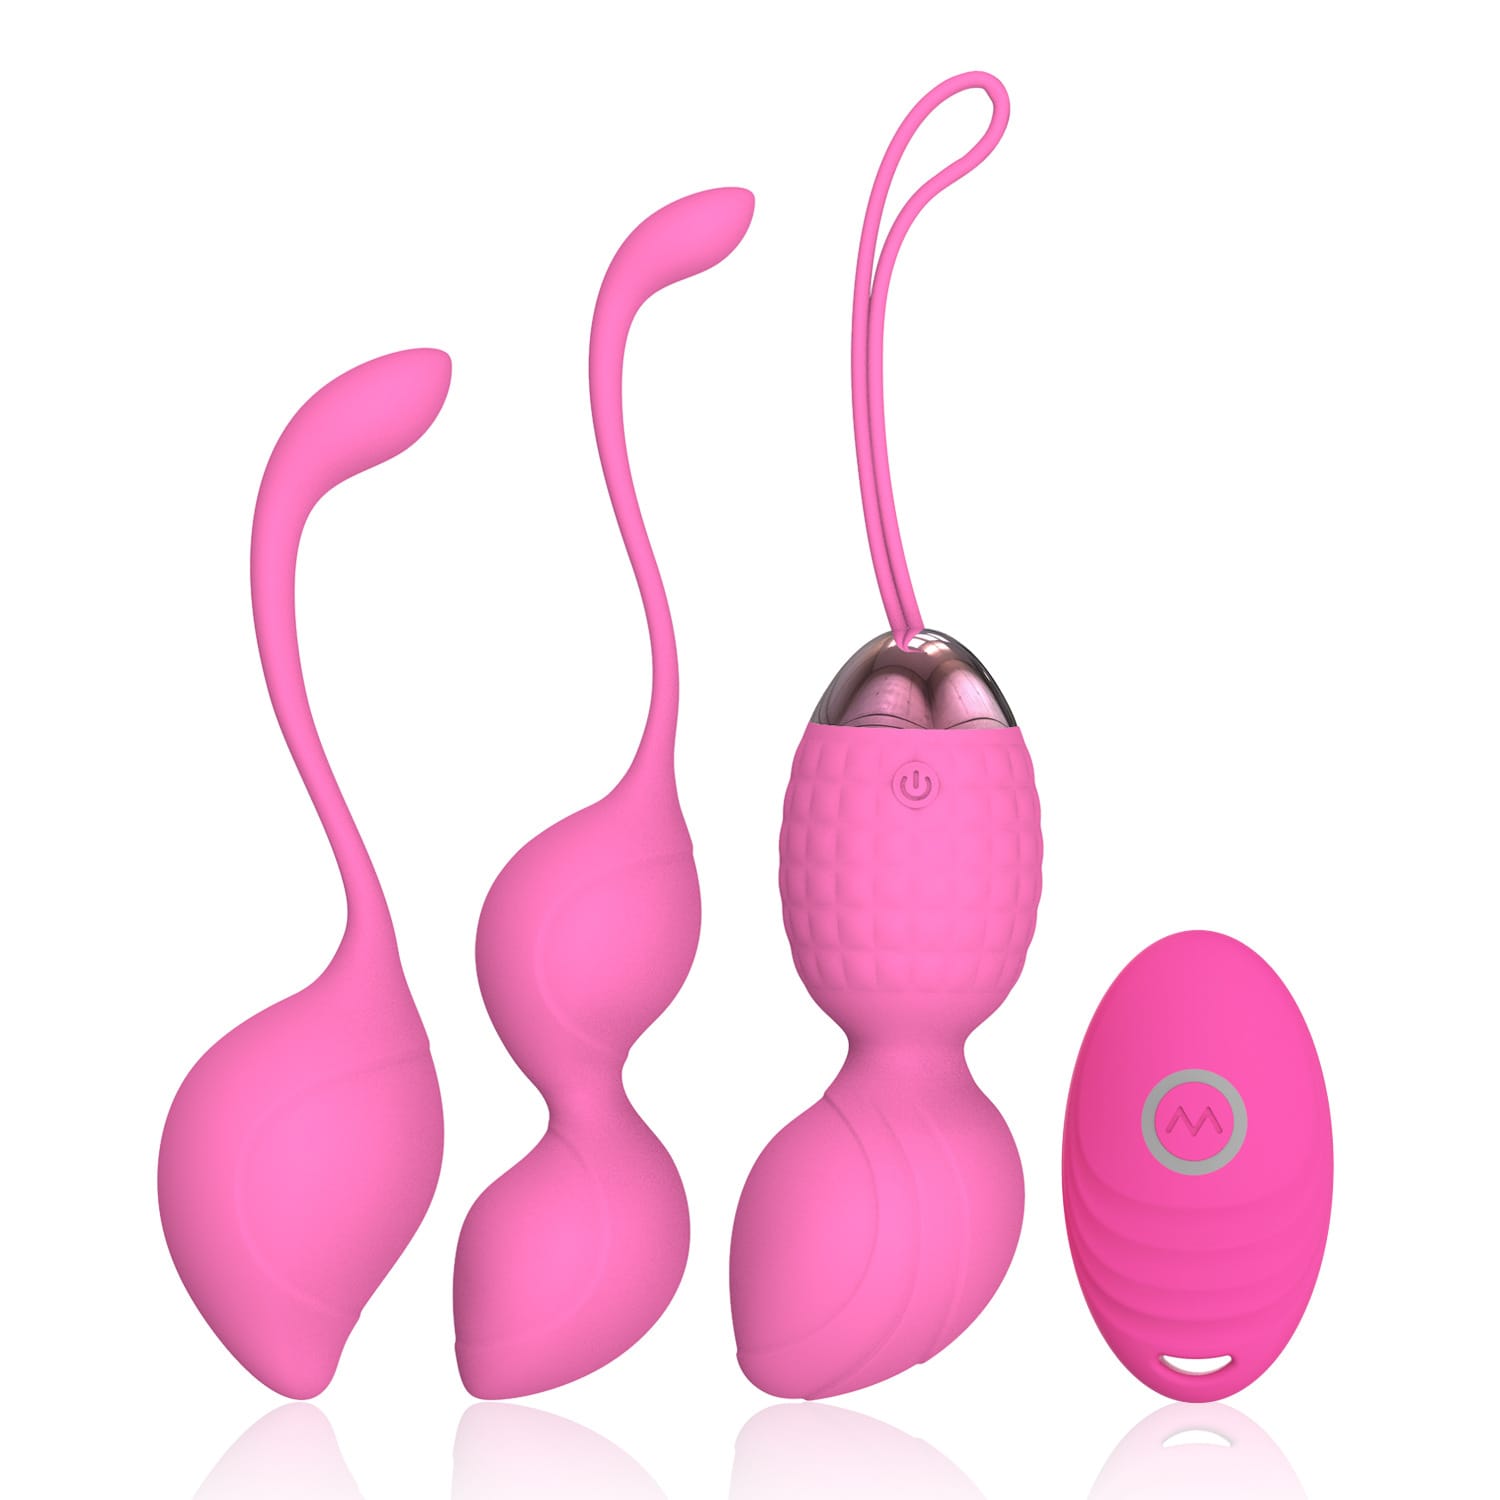 Chinese Ben Wa Use App Controlled Exercise Vibrating Massage Anal Kegel Ball Vagina Ball Set With Vibration For Women